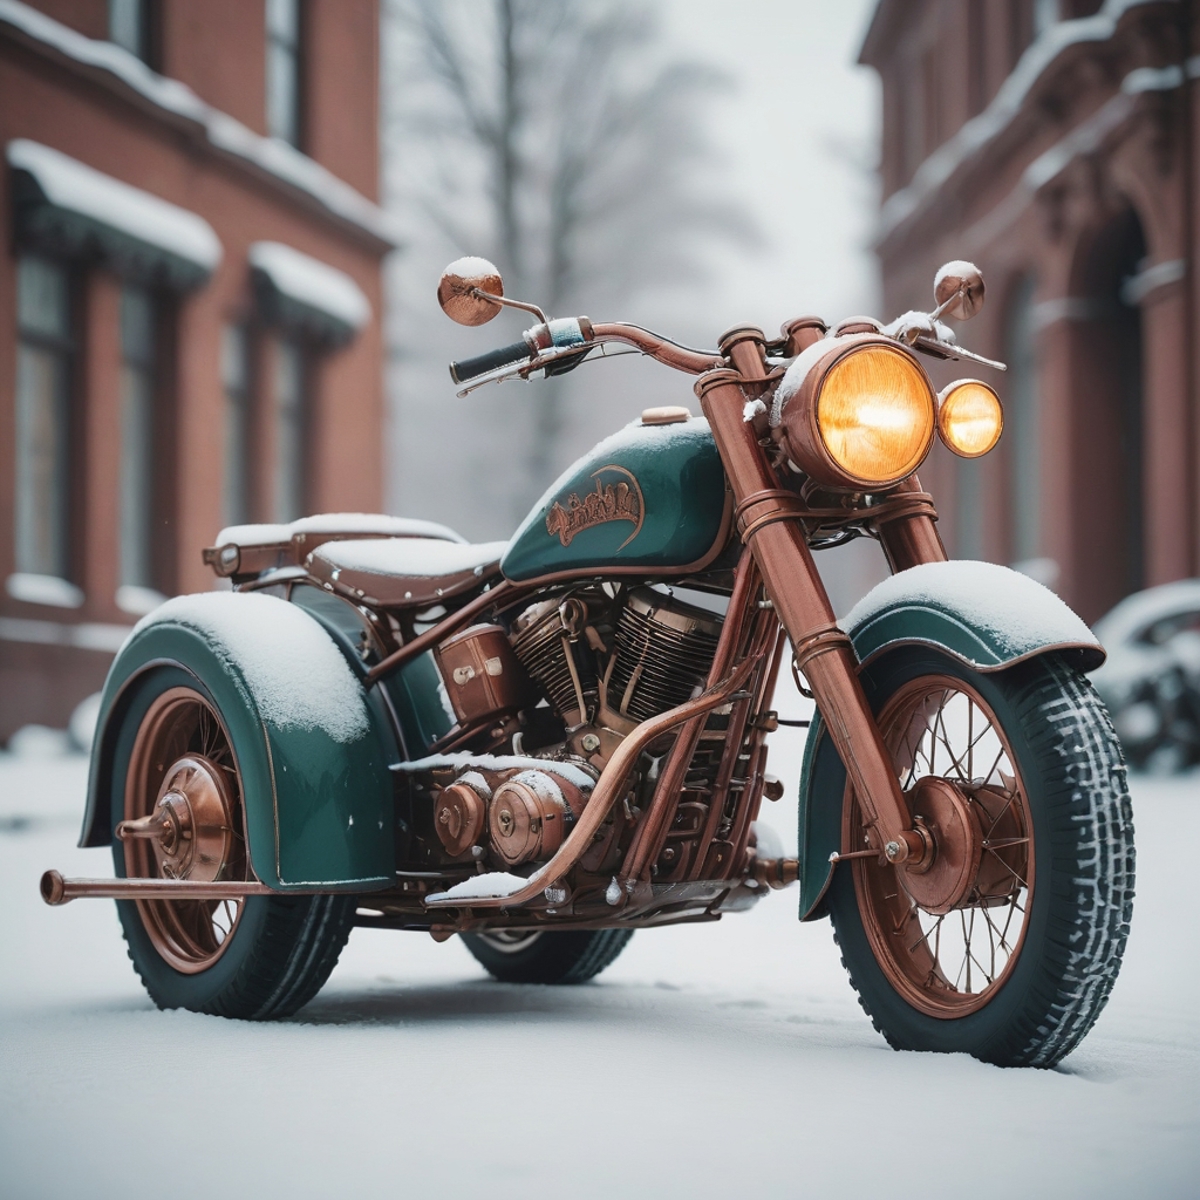 A vintage Harley Davidson motorcycle parked in the snow.